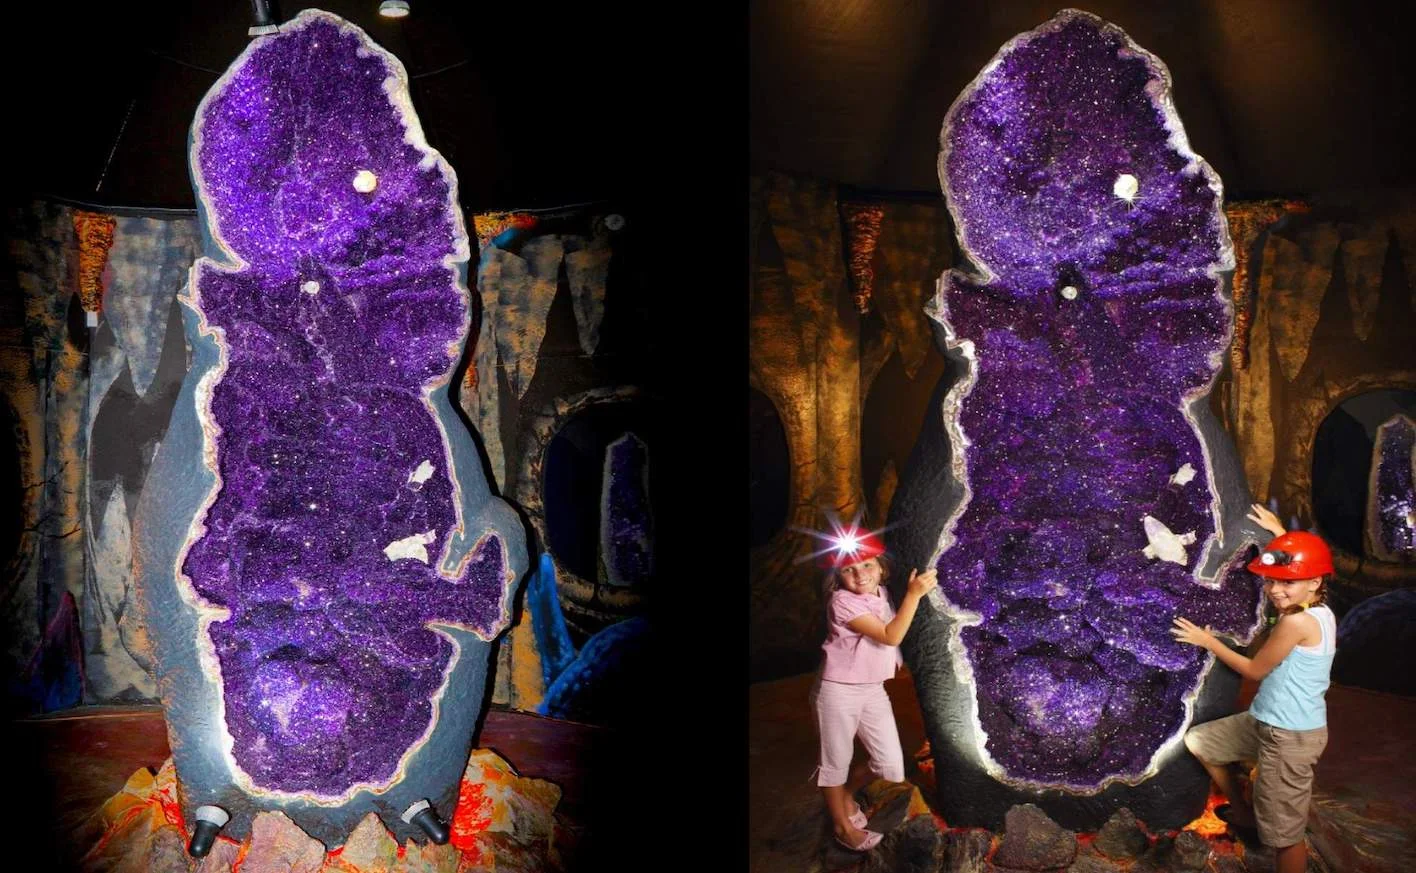 The Empress of Uruguay: The Largest amethyst geode